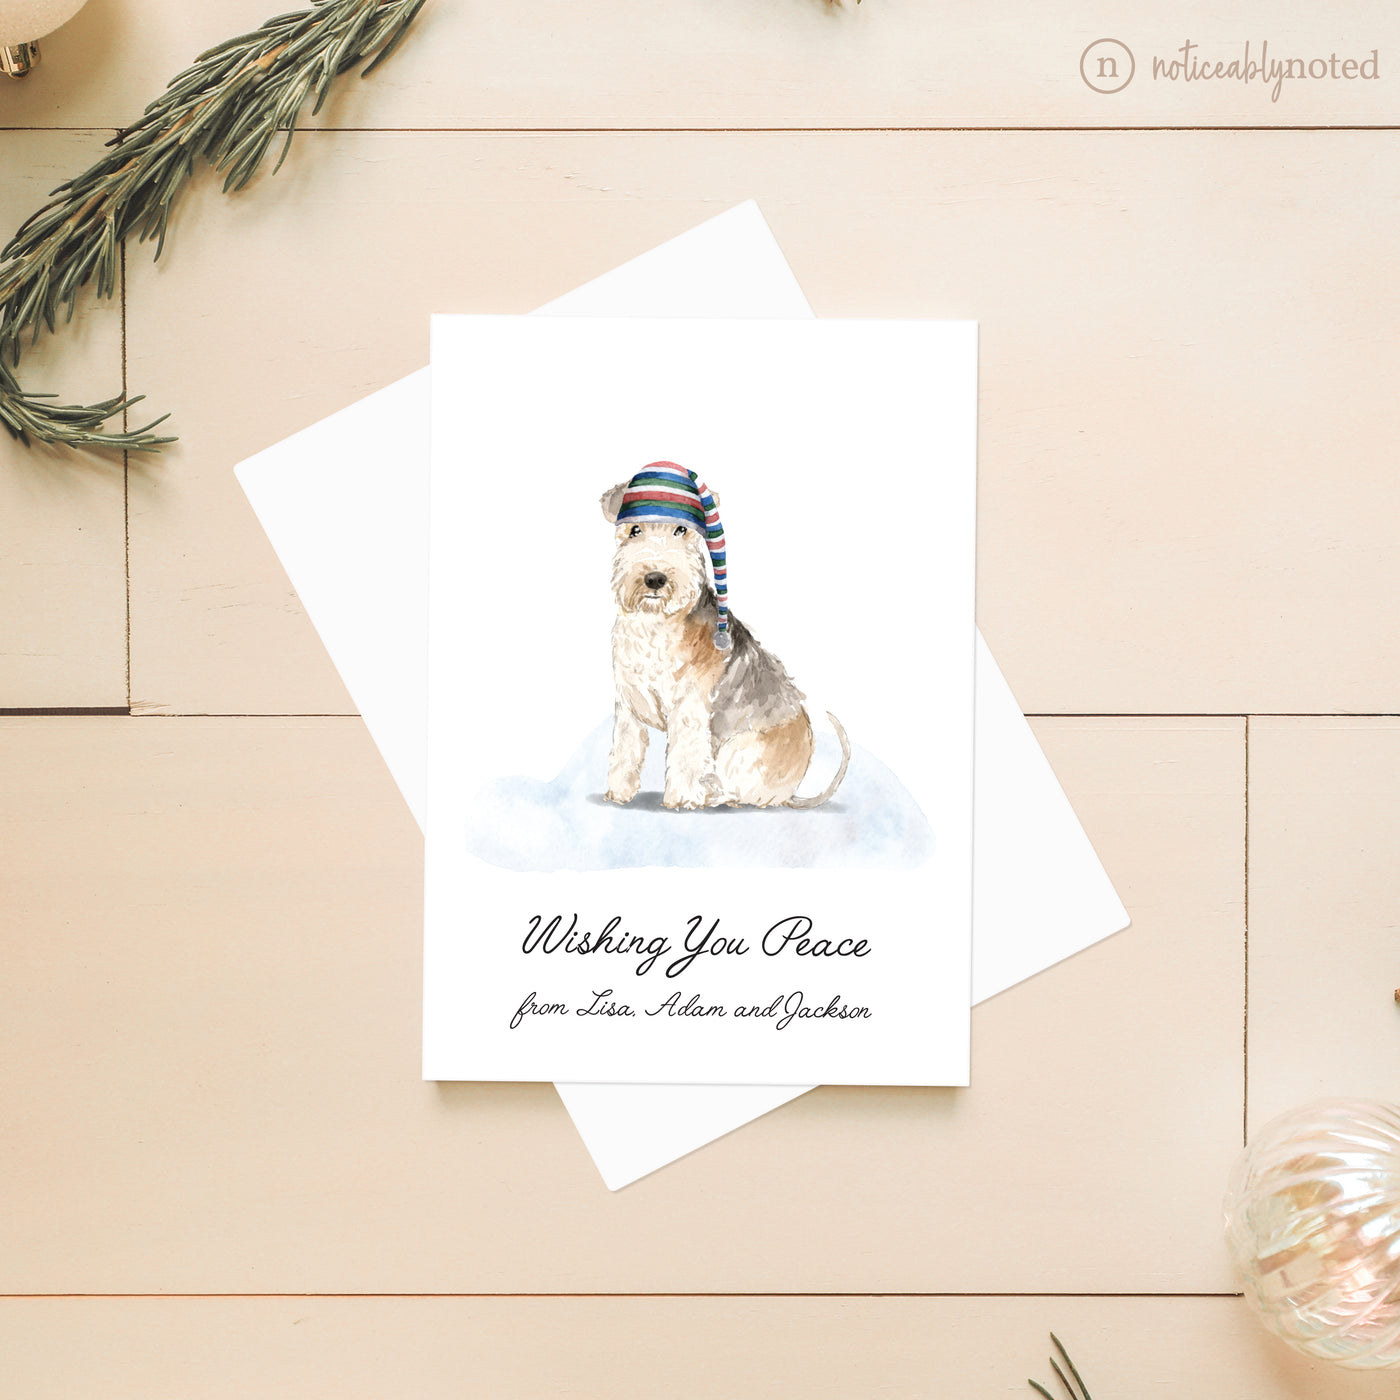 Lakeland Terrier Dog Christmas Cards | Noticeably Noted